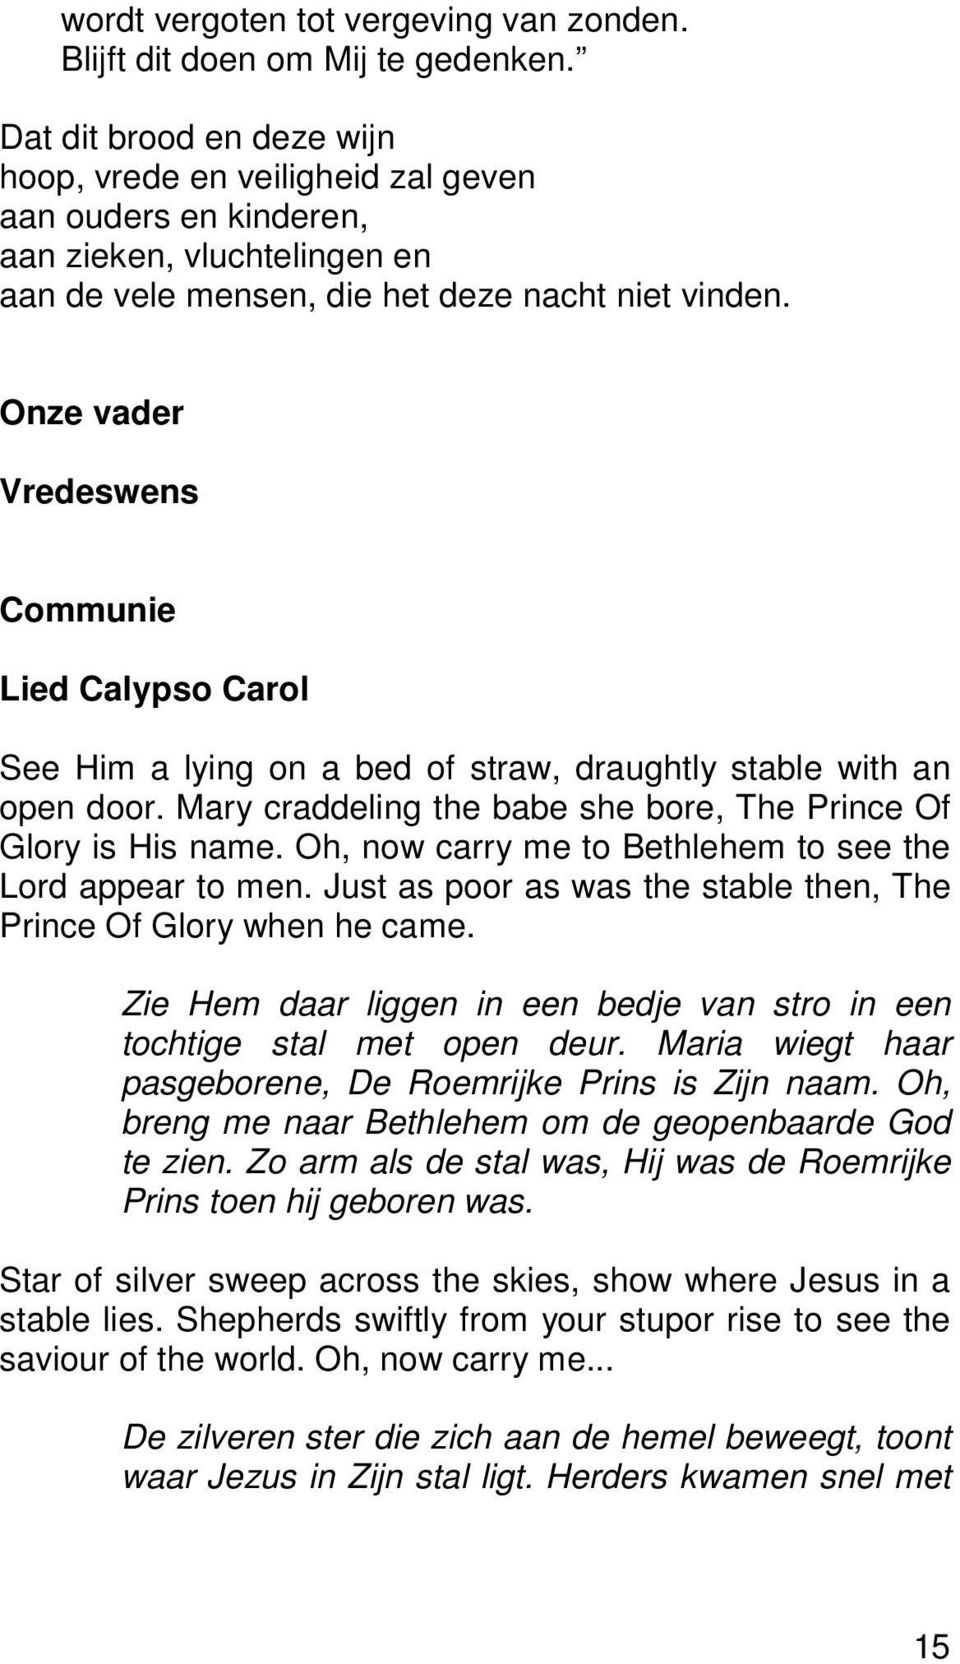 Onze vader Vredeswens Communie Lied Calypso Carol See Him a lying on a bed of straw, draughtly stable with an open door. Mary craddeling the babe she bore, The Prince Of Glory is His name.